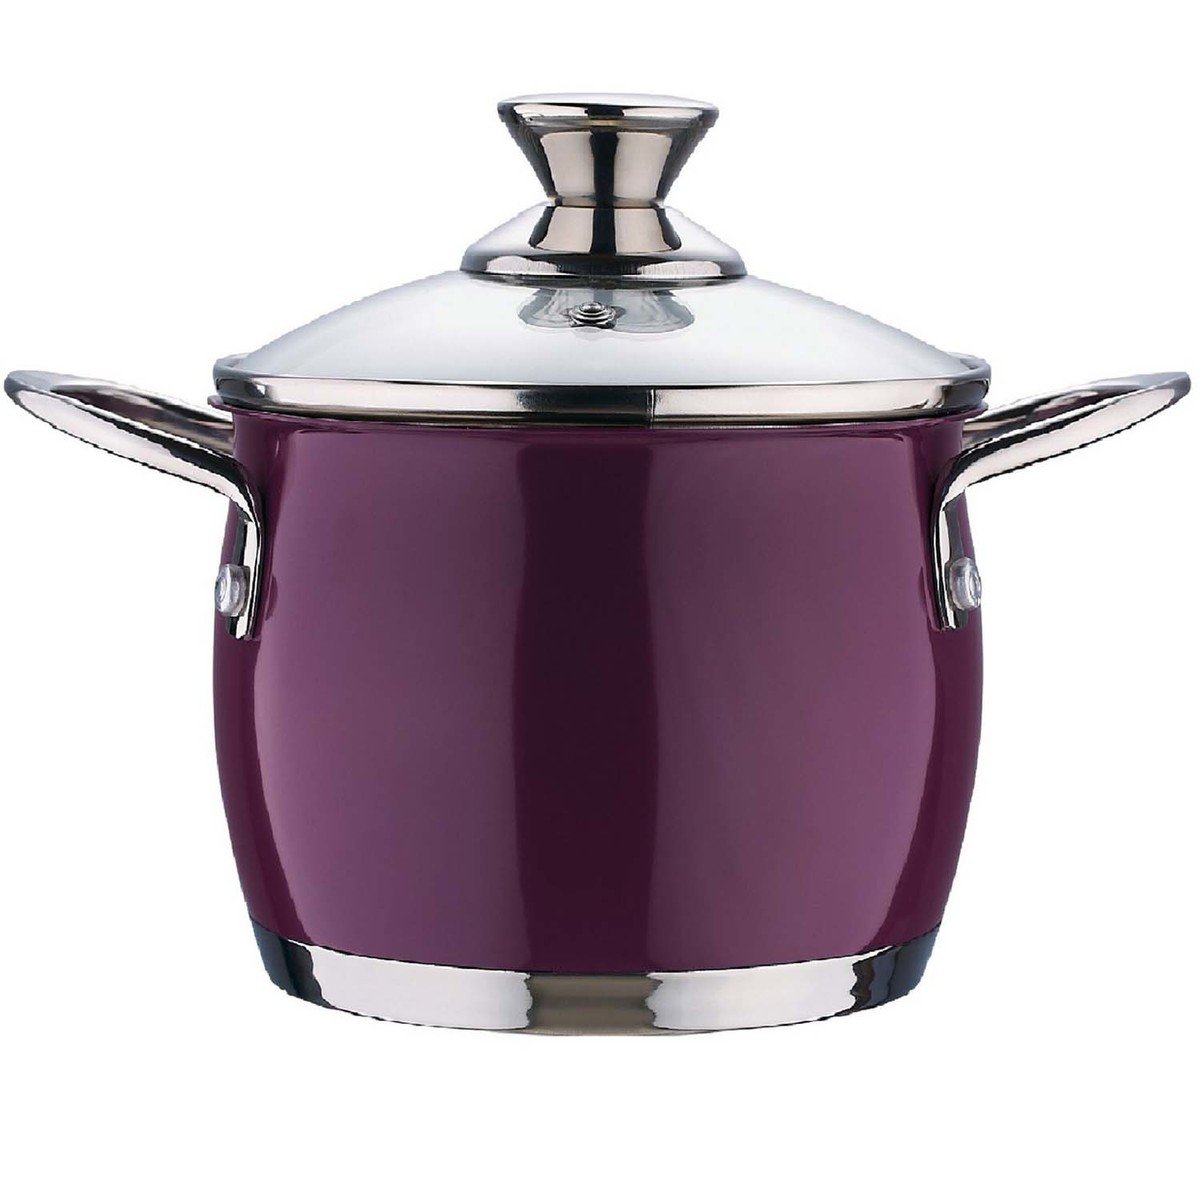 Bergner Stainless Steel Casserole 24cm Assorted Colors